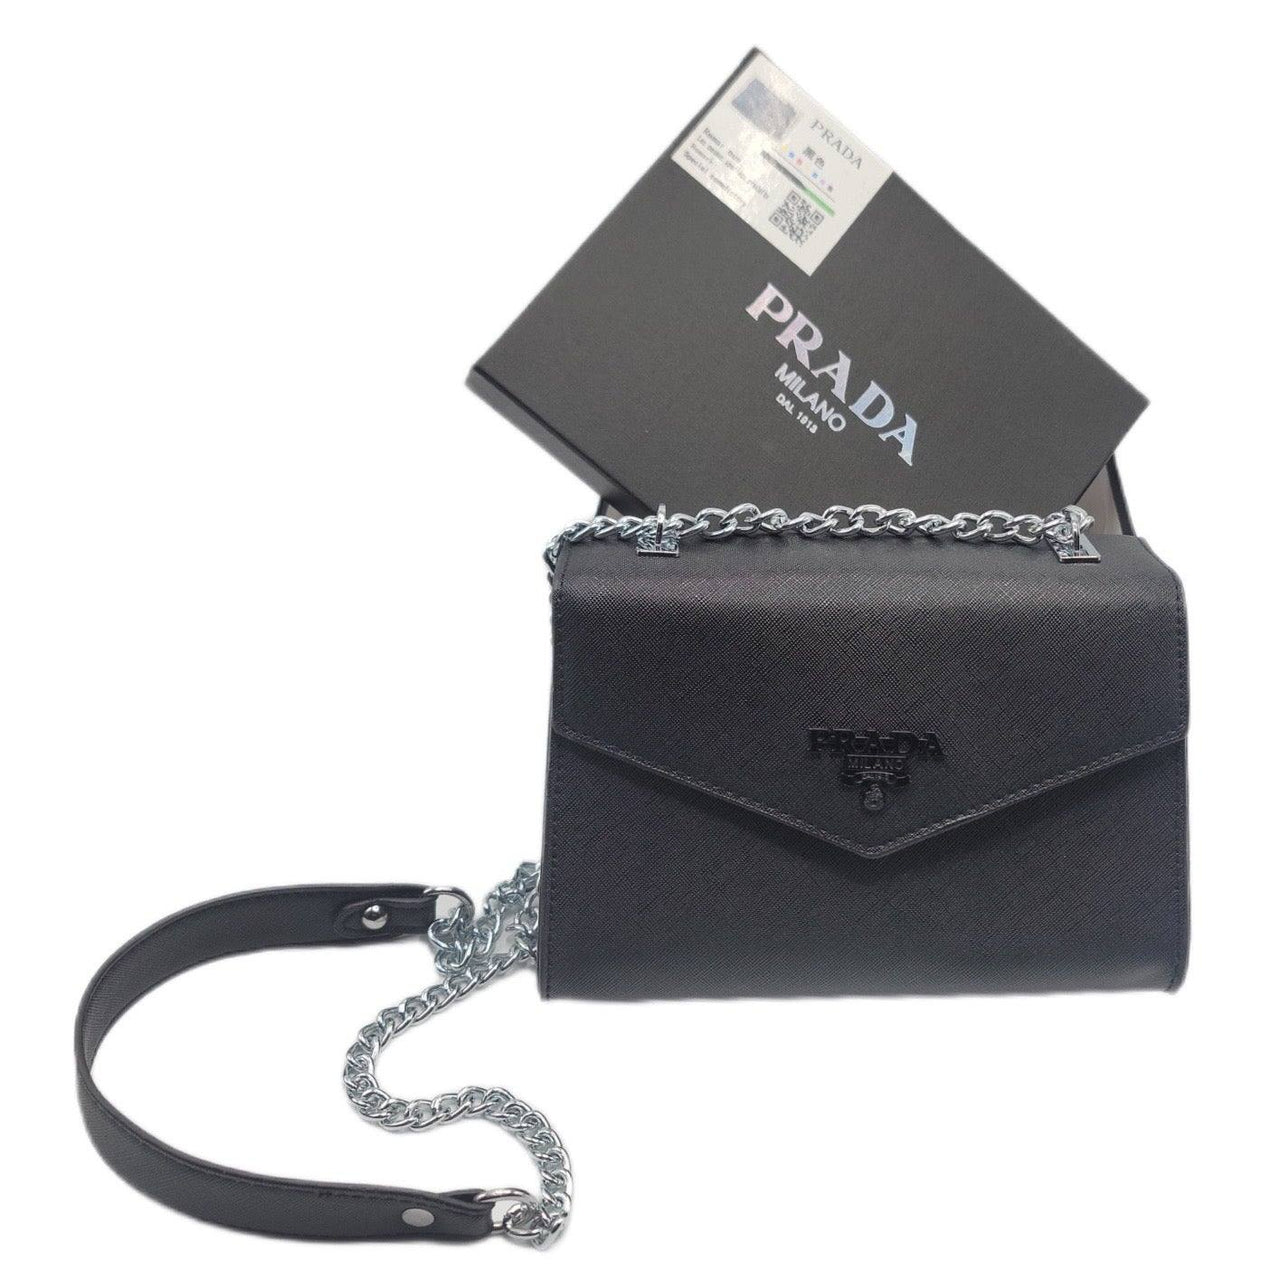 The Bag Couture Handbags, Wallets & Cases PRADA Brushed Leather Crossbody Bag Black